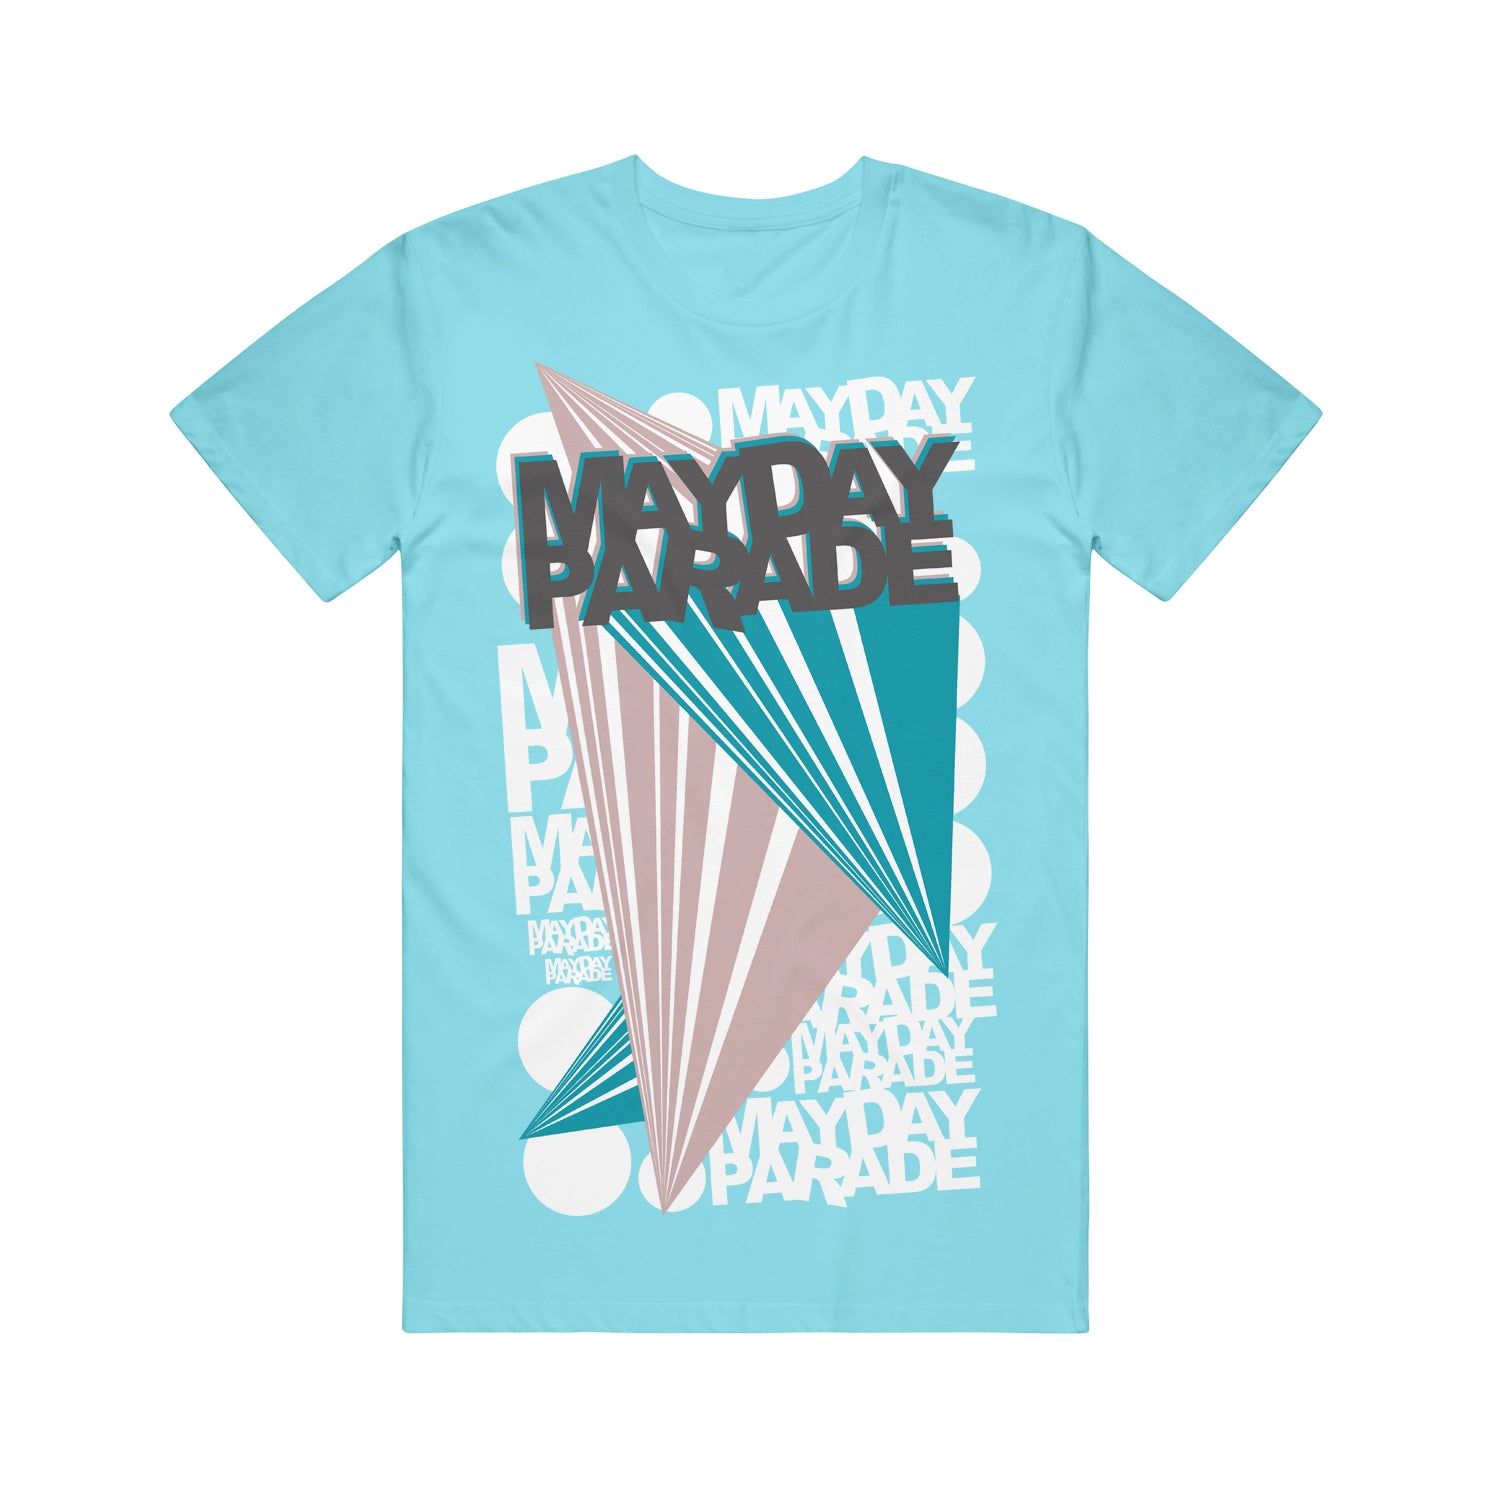 image of an aqua blue tee shirt on a white background. tee has a full chest print in cream and pink pink. at the top center in black says mayday parade then two diamond shapes below with mayday parade repeated behind in cream.